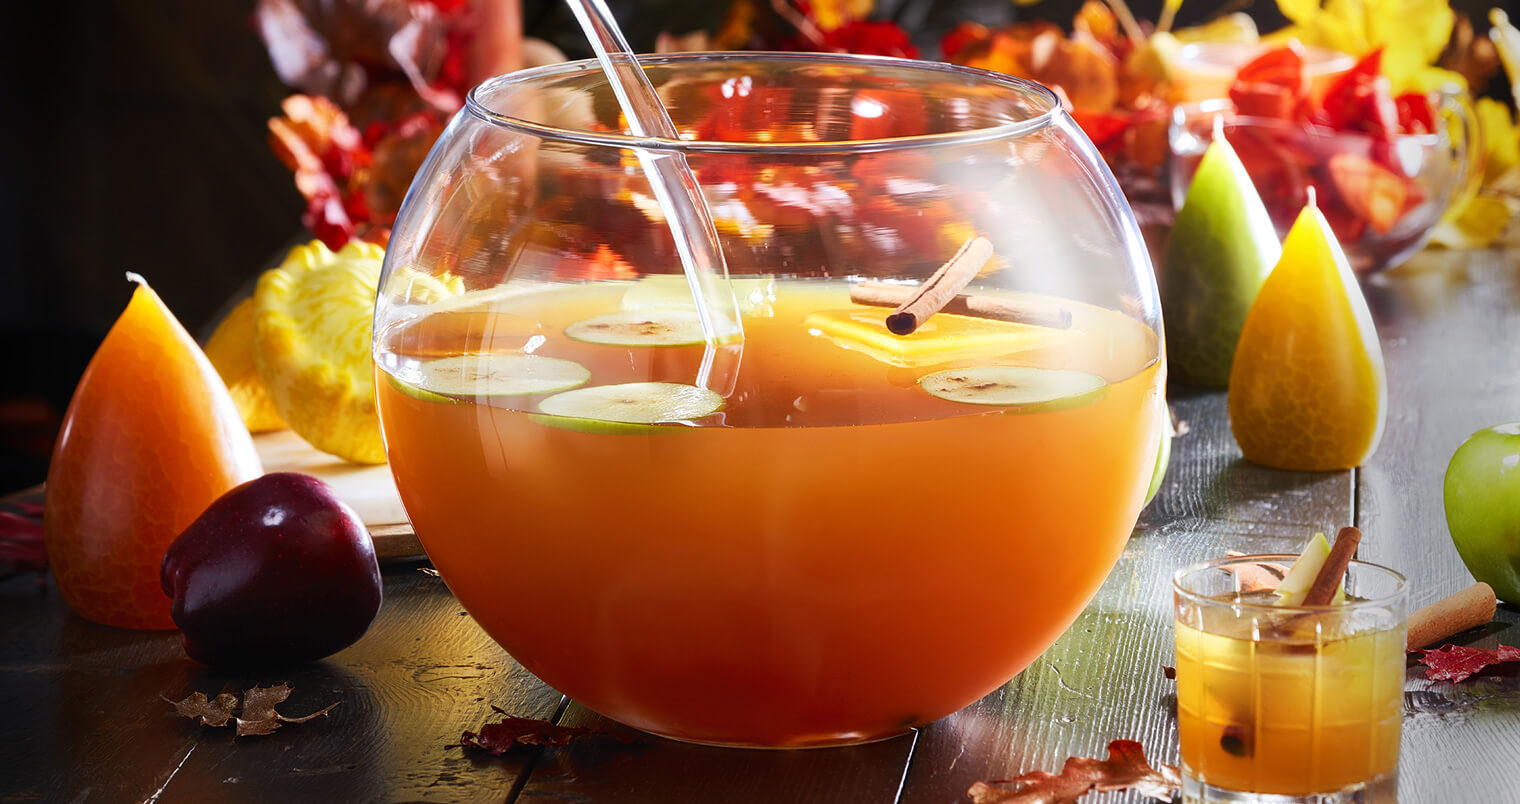 BACARDÍ Friendsgiving Rum Punch bowl, featured image